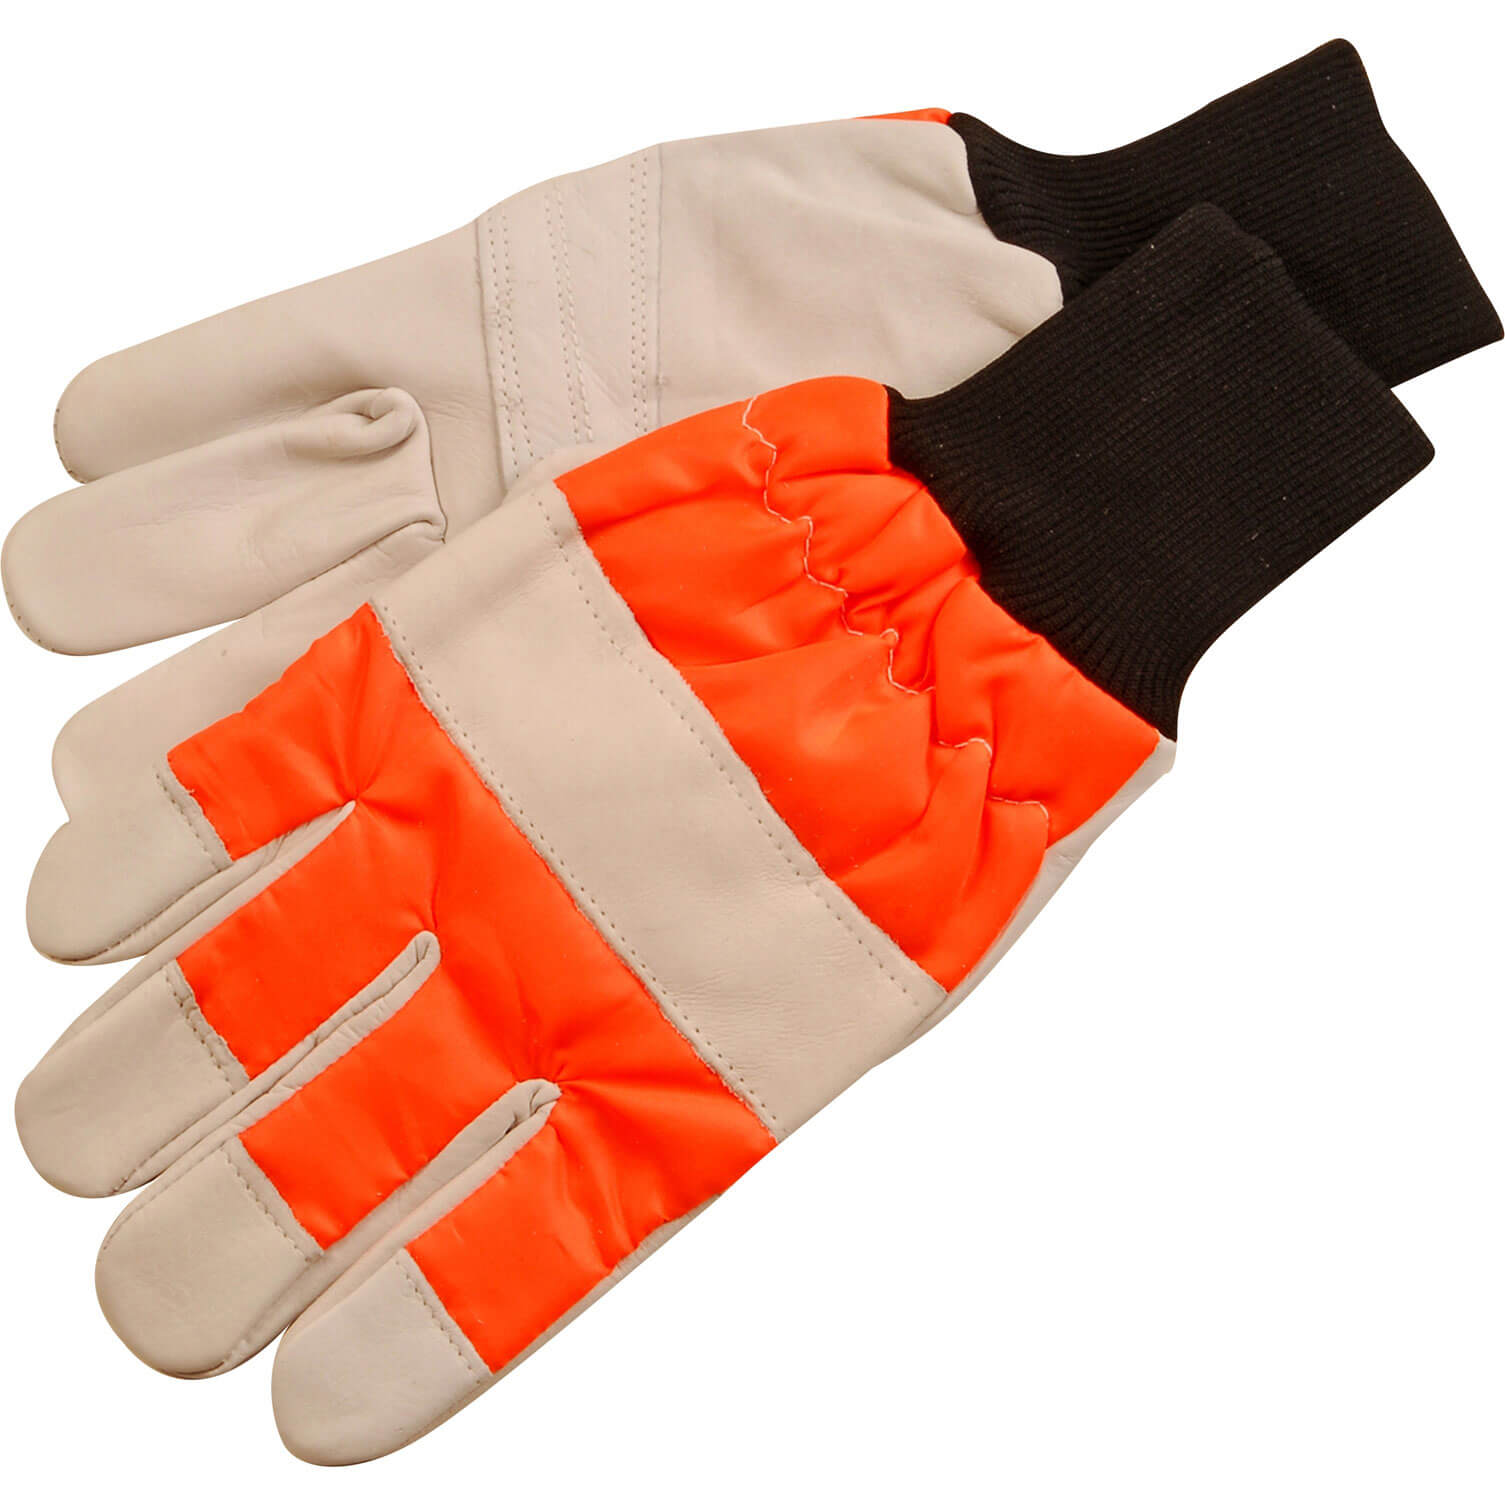 Photo of Alm Chainsaw Safety Gloves Left Hand Protection One Size